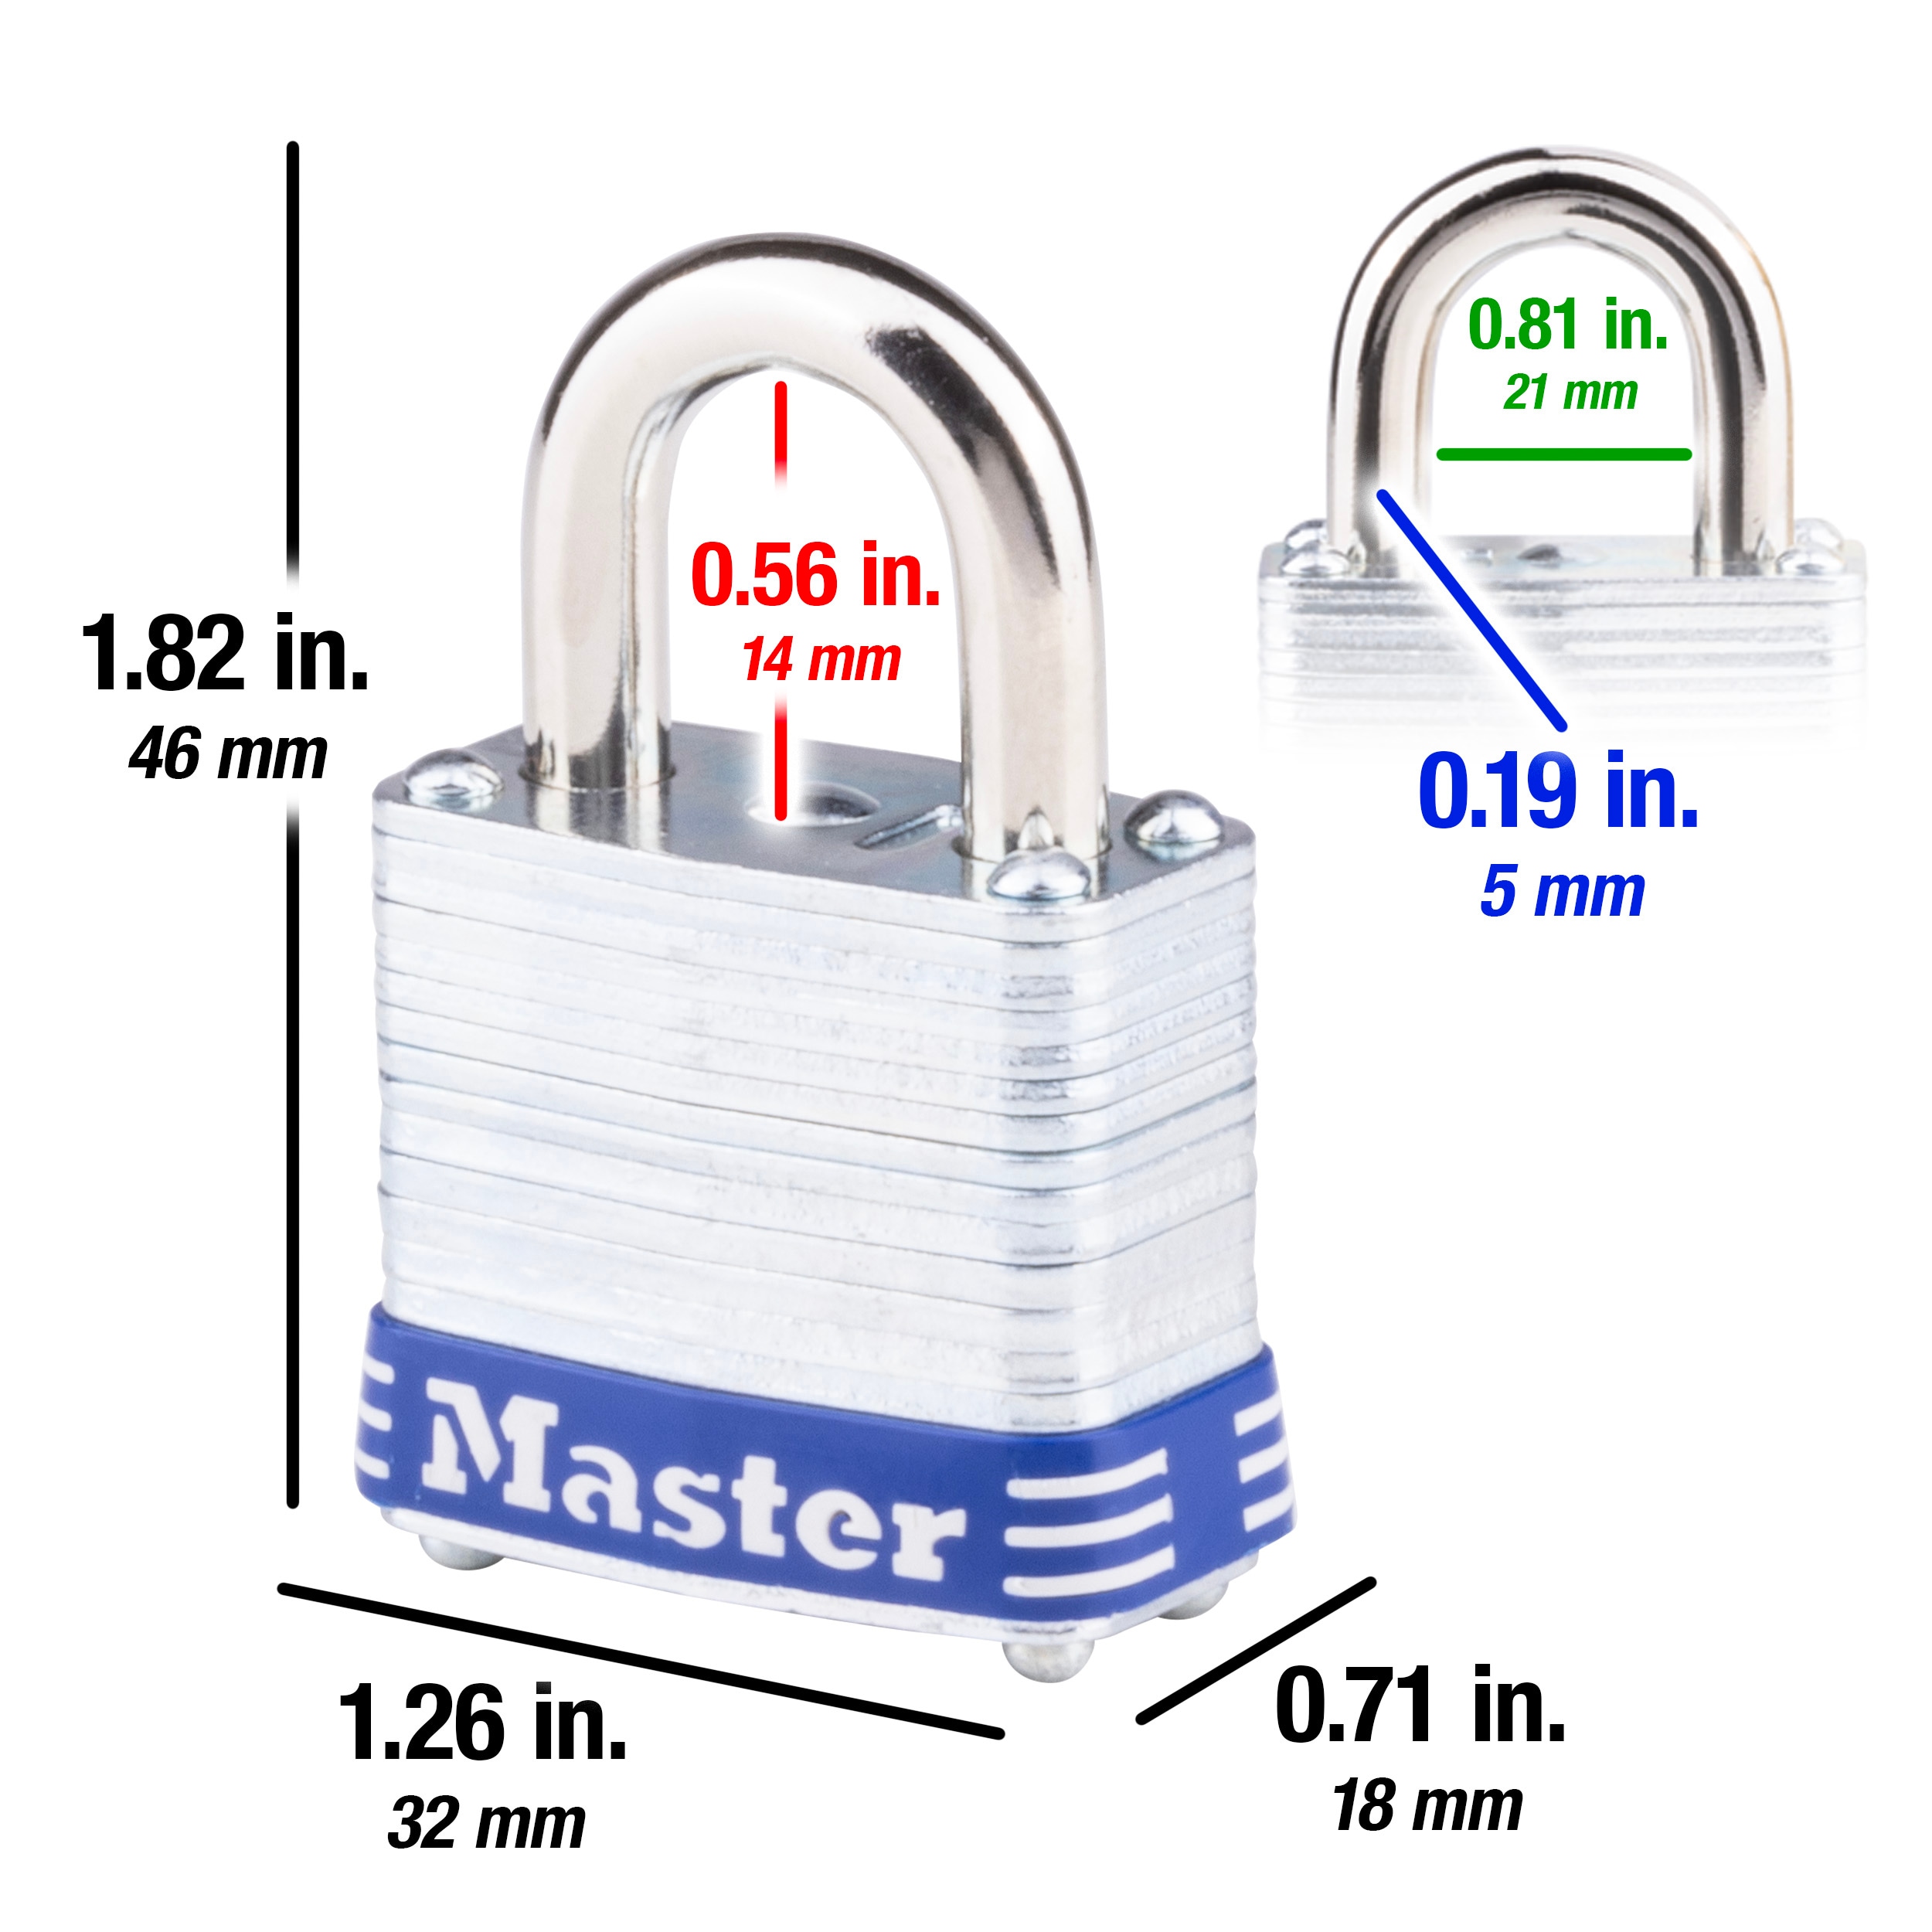 Master Lock Commercial Keyed Padlock, 1-9/16-in Wide x 1-1/2-in